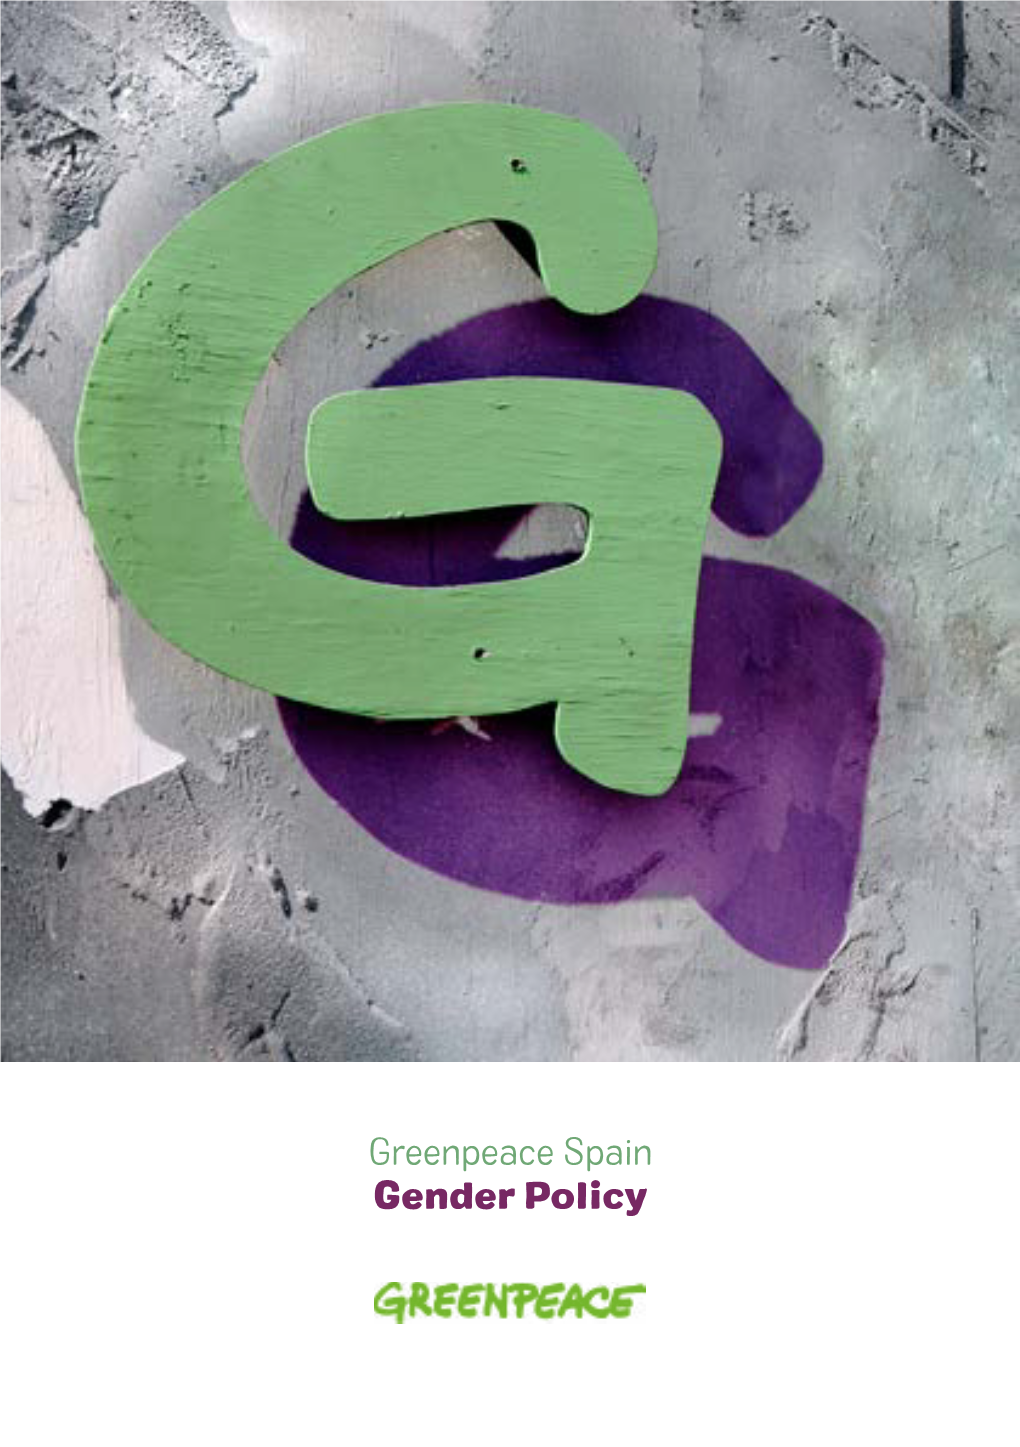 Greenpeace Spain Gender Policy Contents